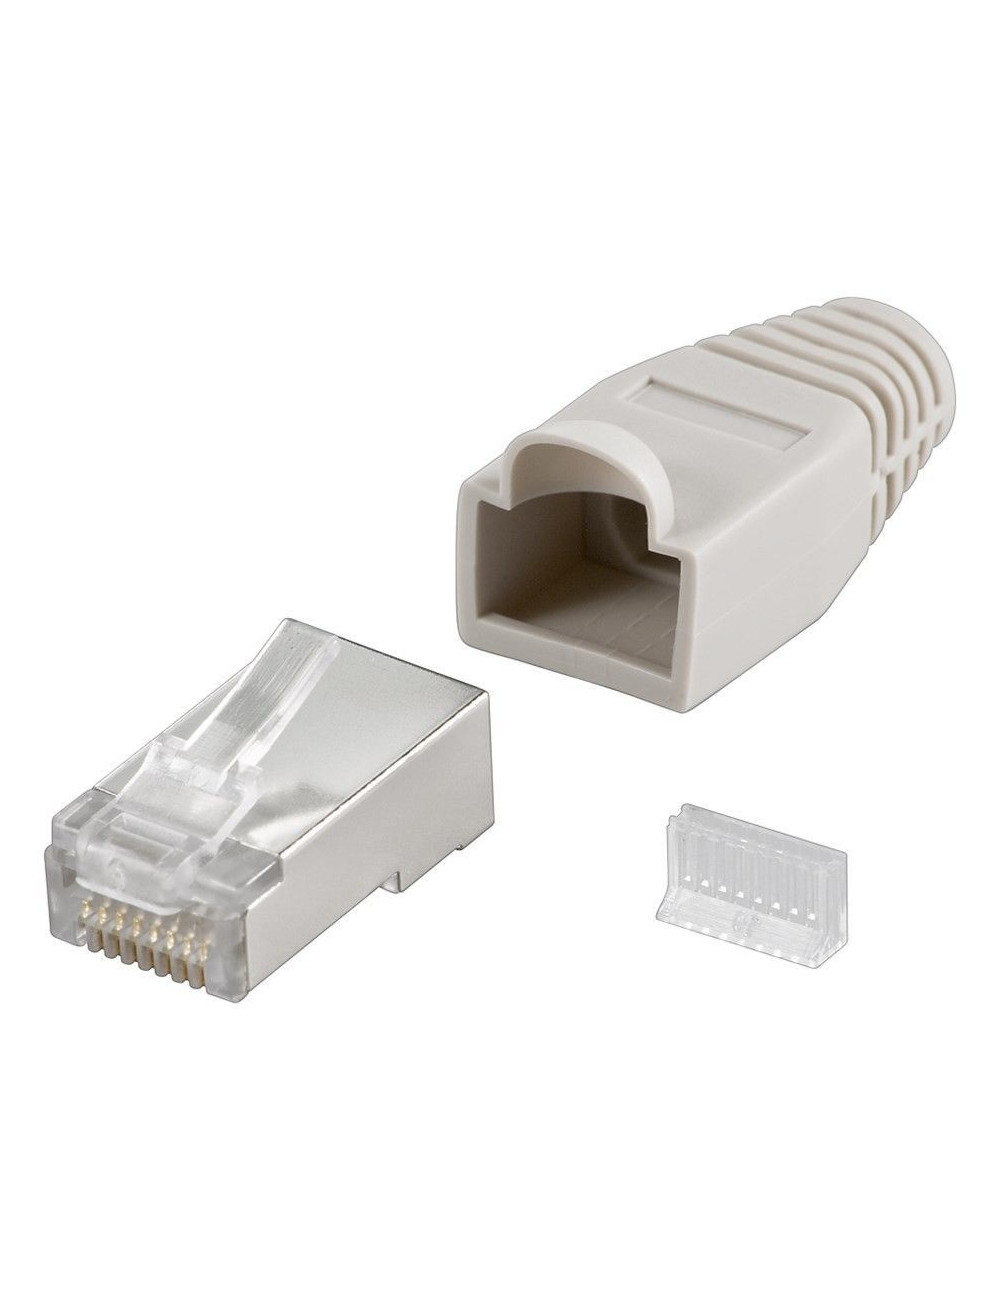 Goobay 68746 RJ45 plug, CAT 5e STP shielded with strain-relief boot, grey